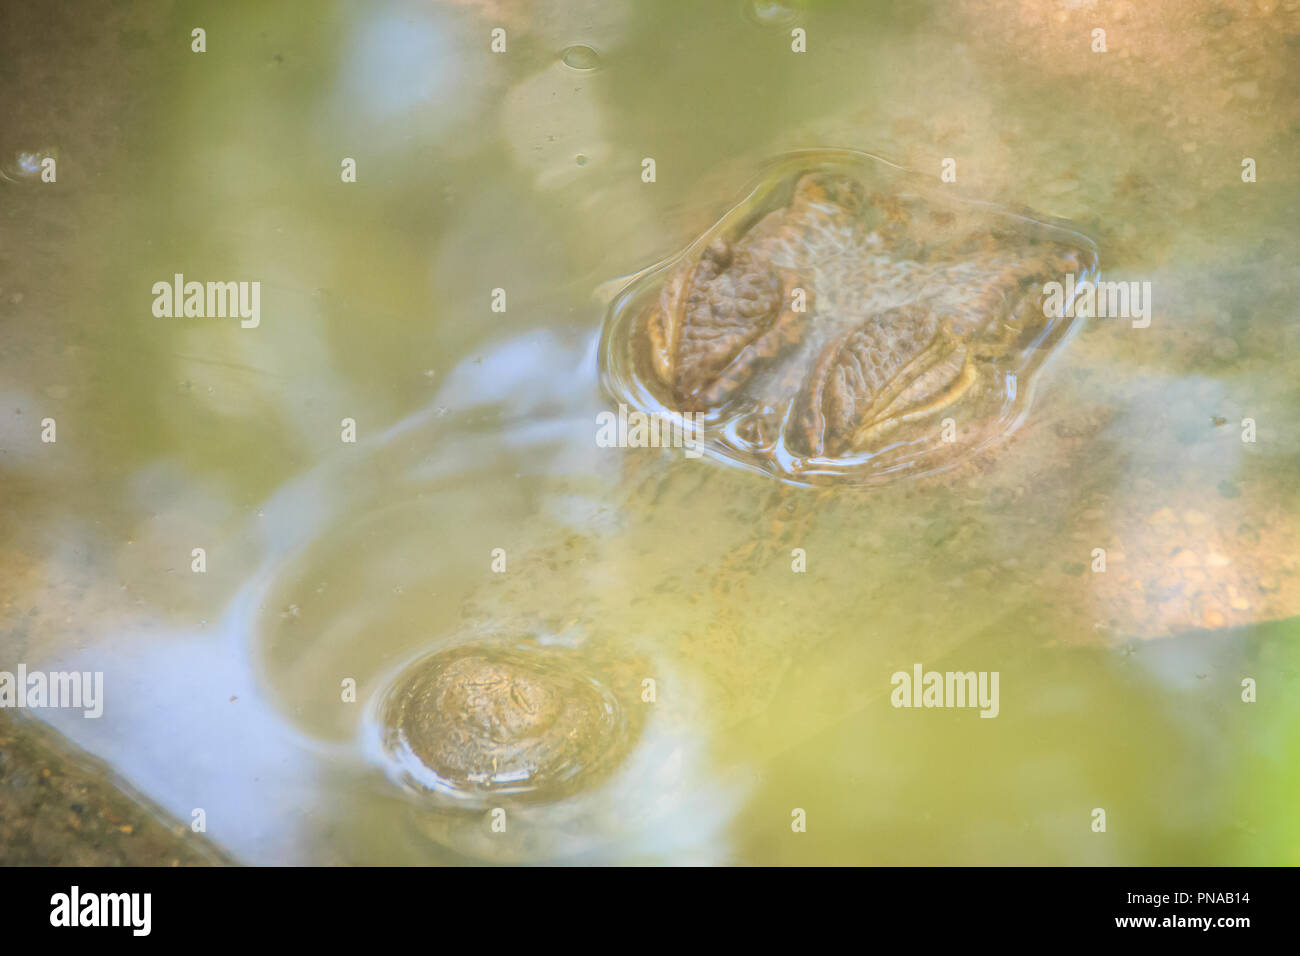 Big and frightening eye of a Caiman (Caimaninae) crocodile staying in still water Stock Photo